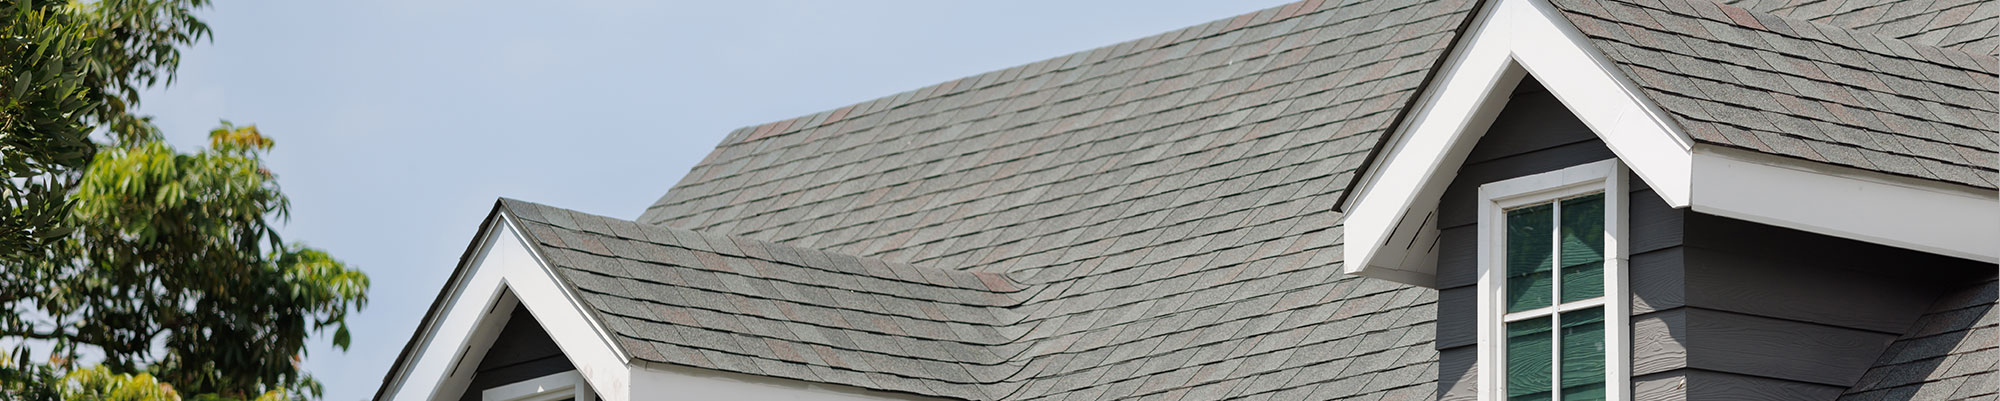 Caledonia roof replacement company